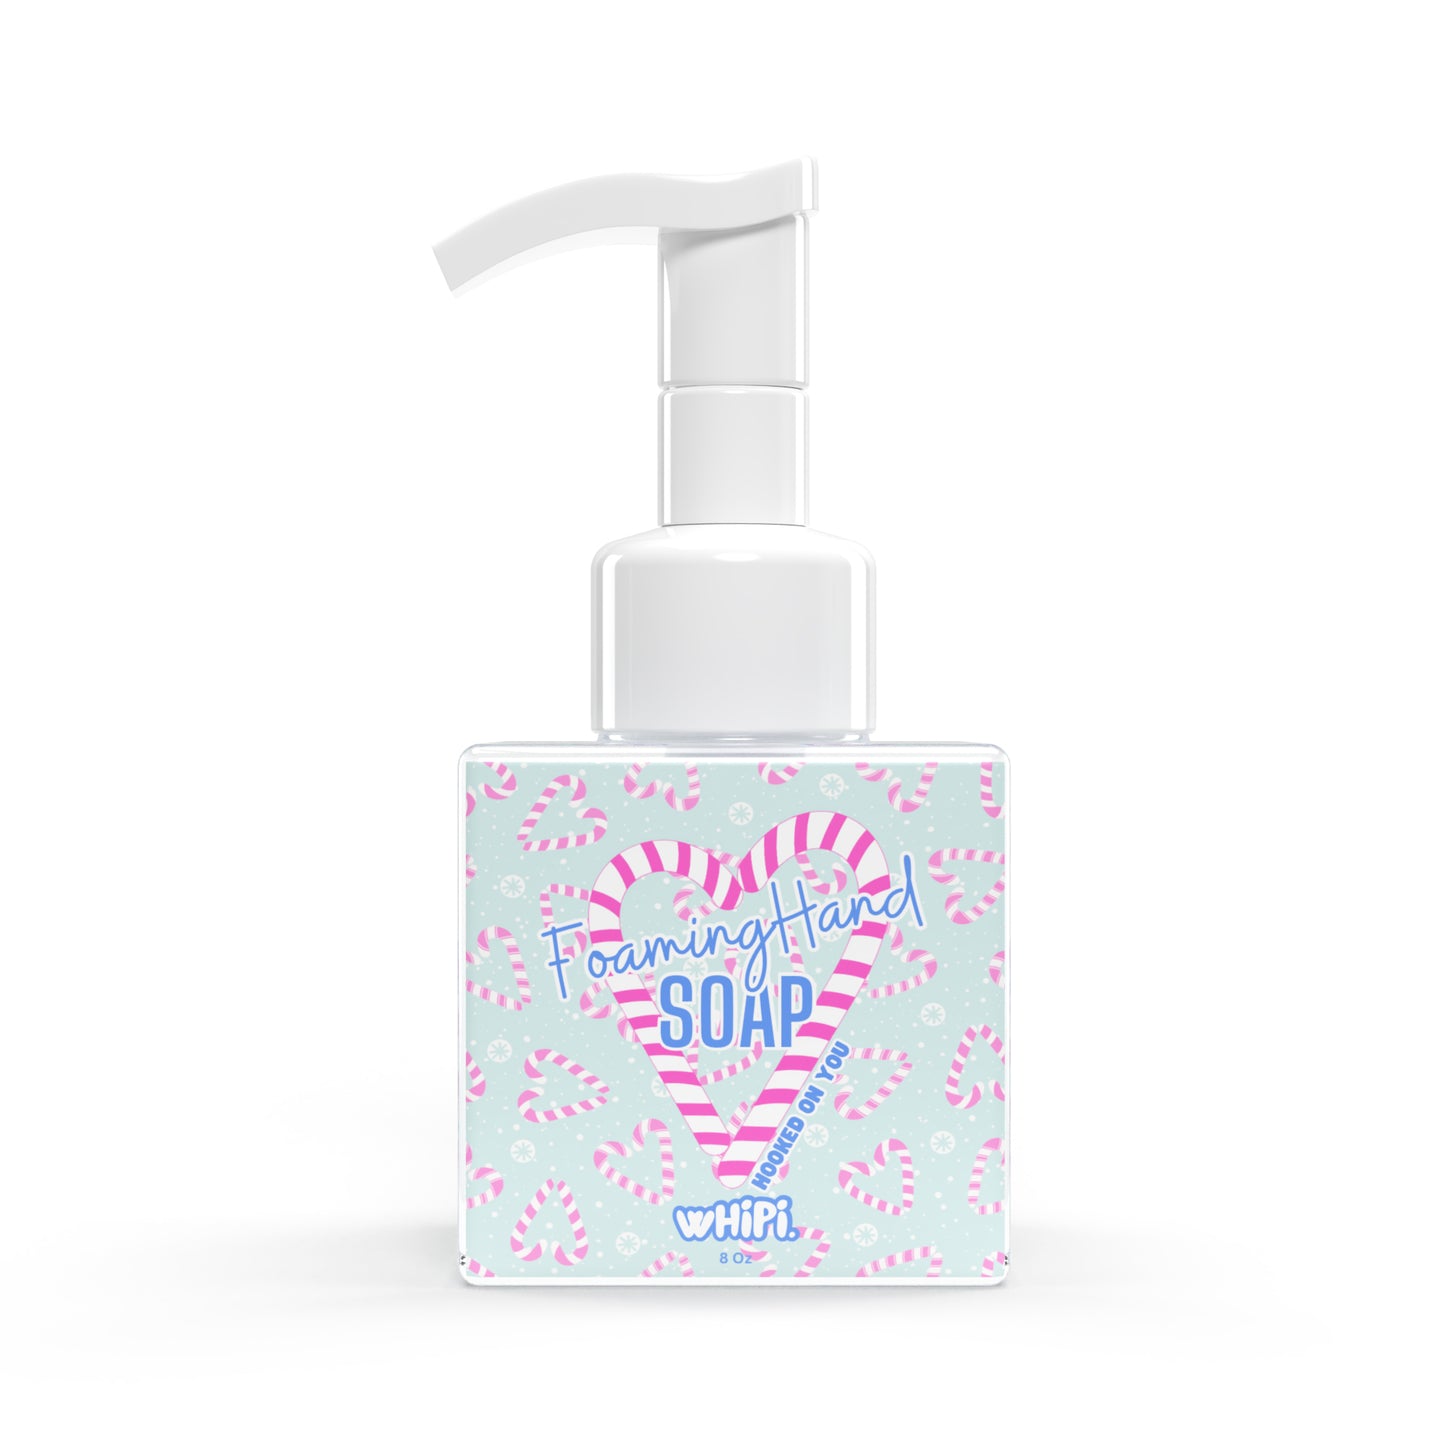 Hooked On You Hand Soap